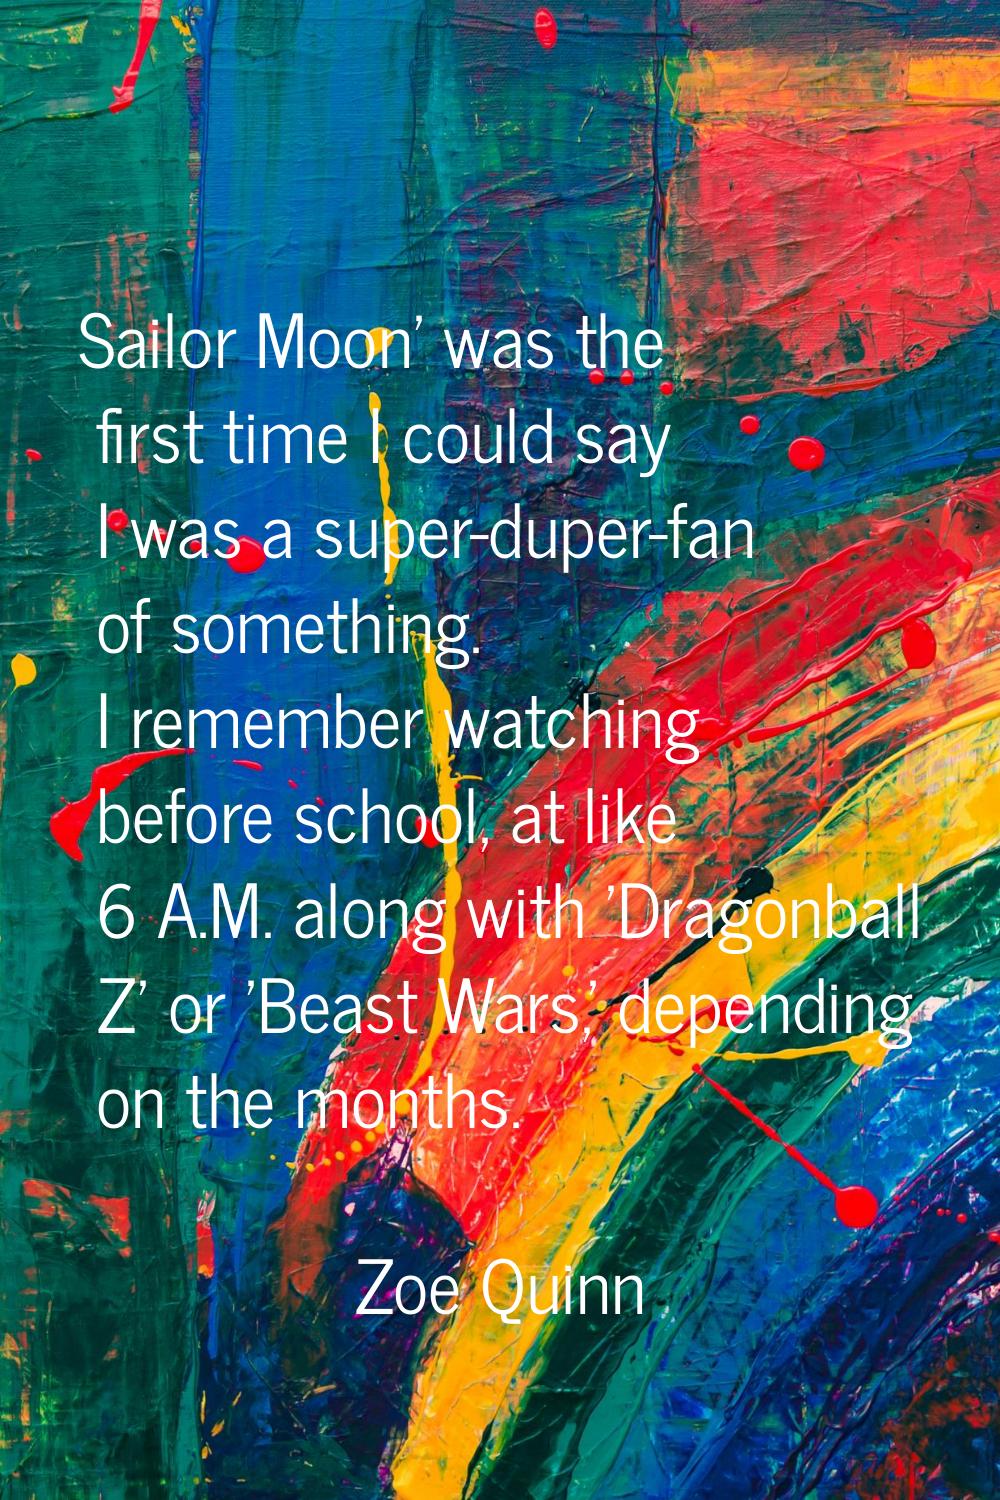 Sailor Moon' was the first time I could say I was a super-duper-fan of something. I remember watchi